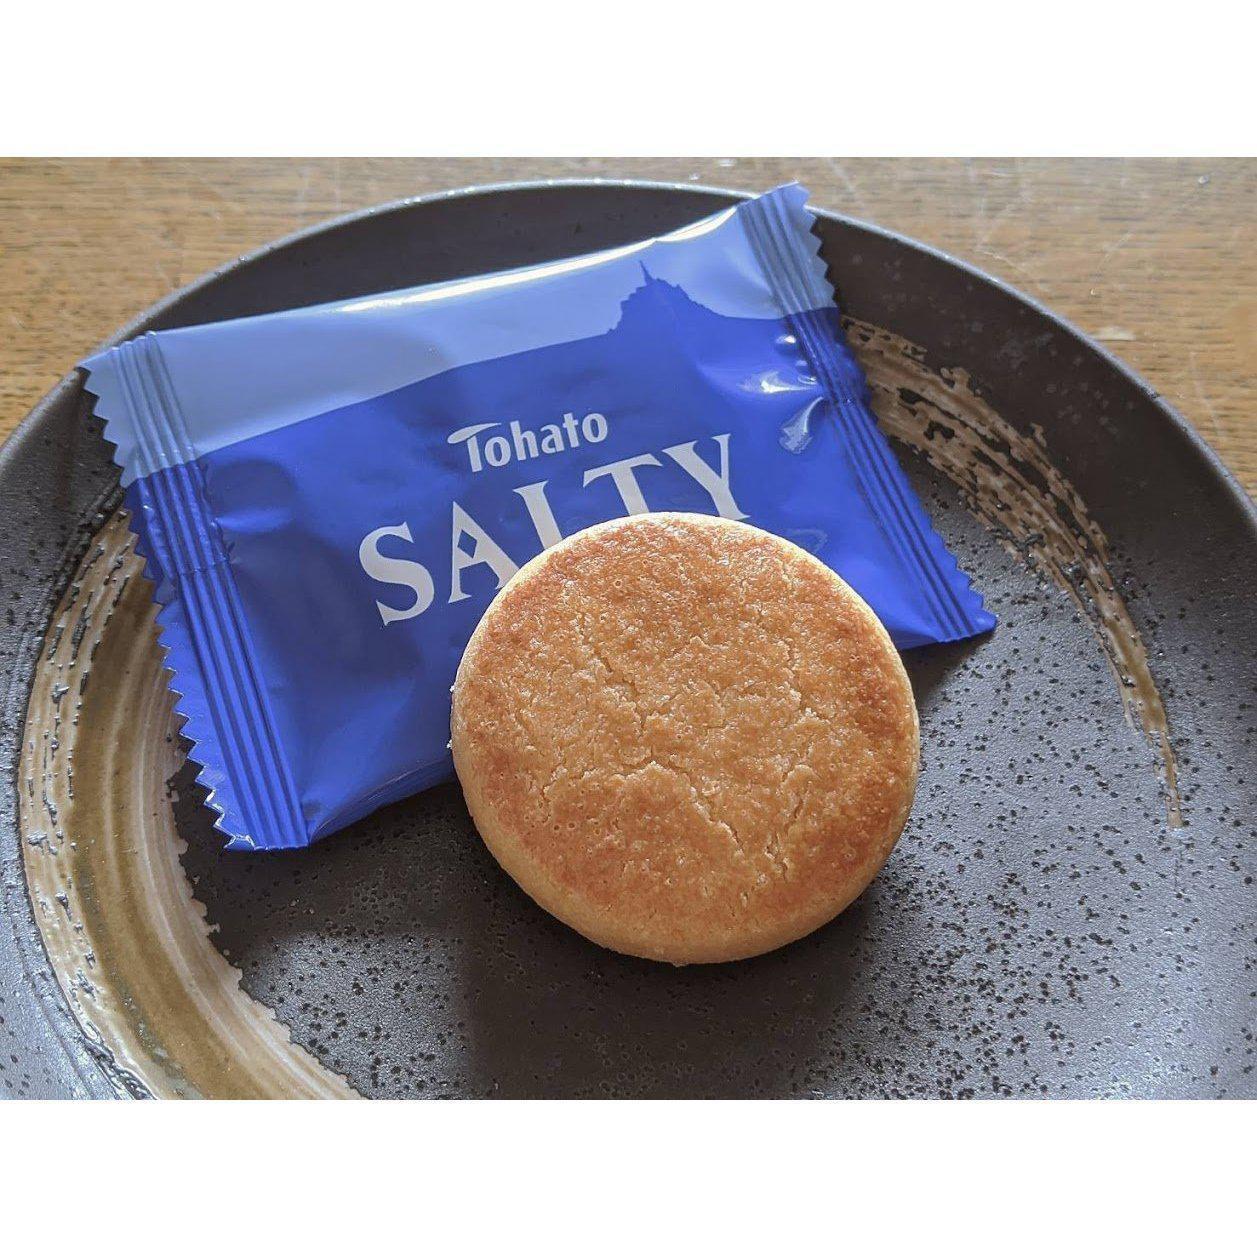 Tohato Salty Salted Butter Biscuits 8 Pieces